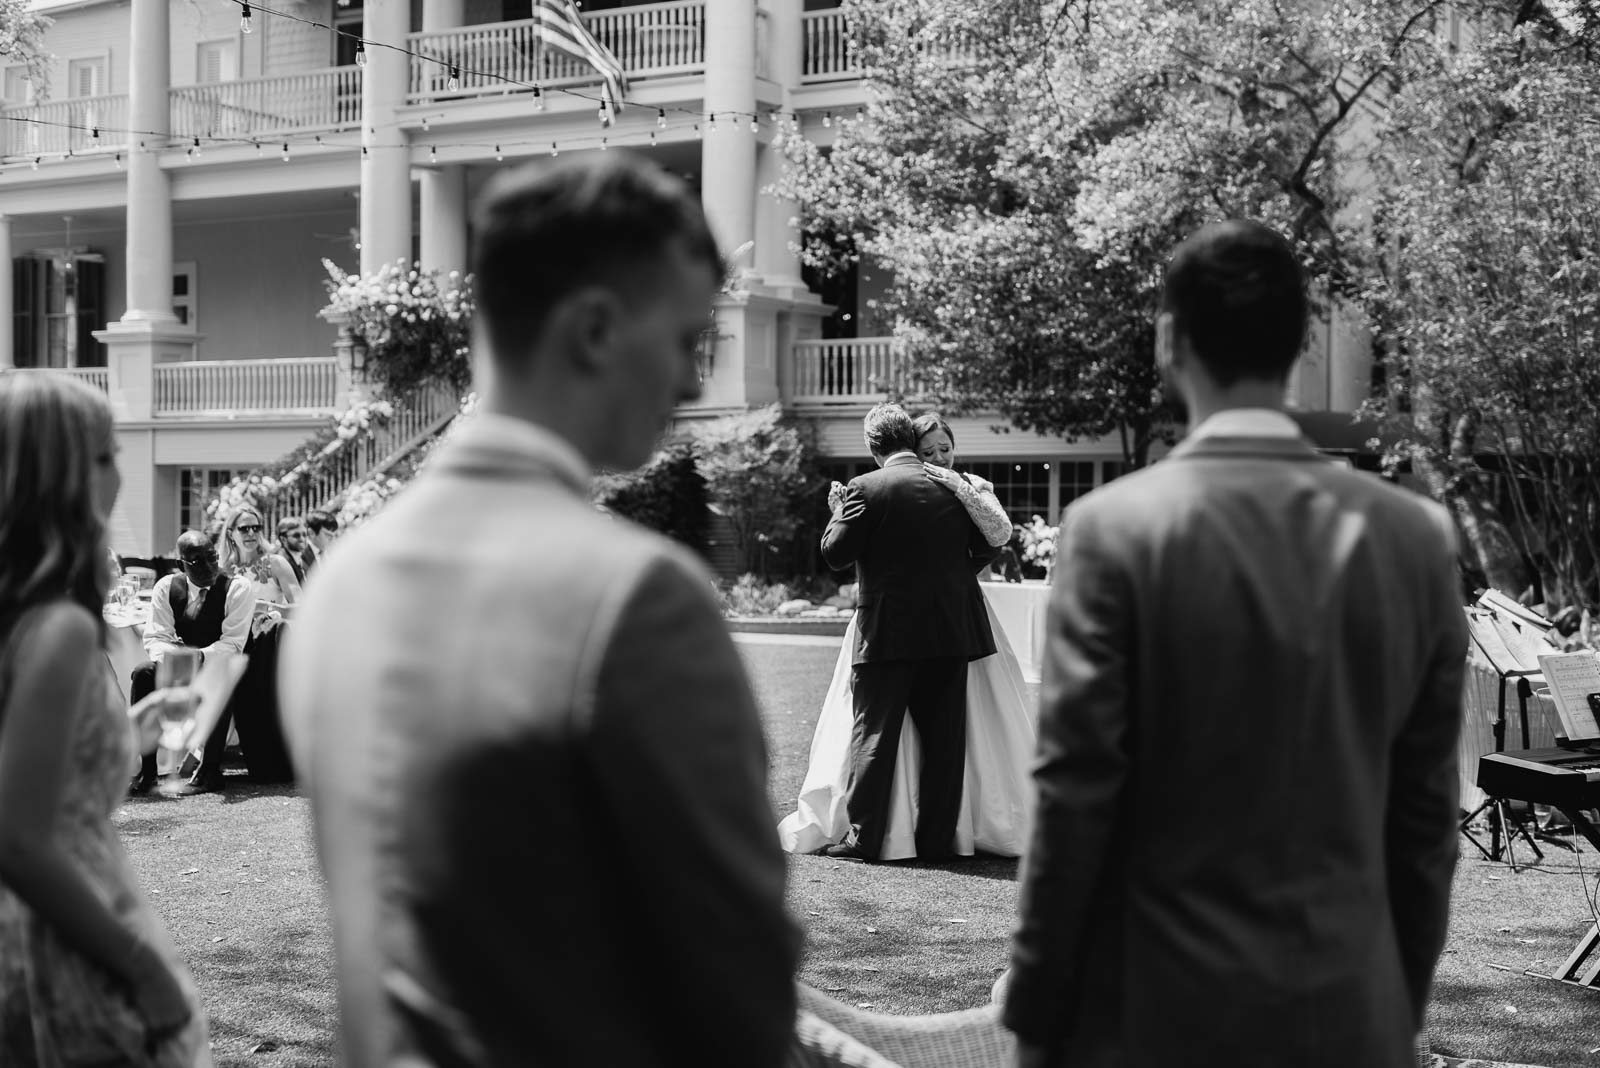 Photograph from behind the groom and groomsmen a look on as the father of the bride and the bride had the first father daughter dance